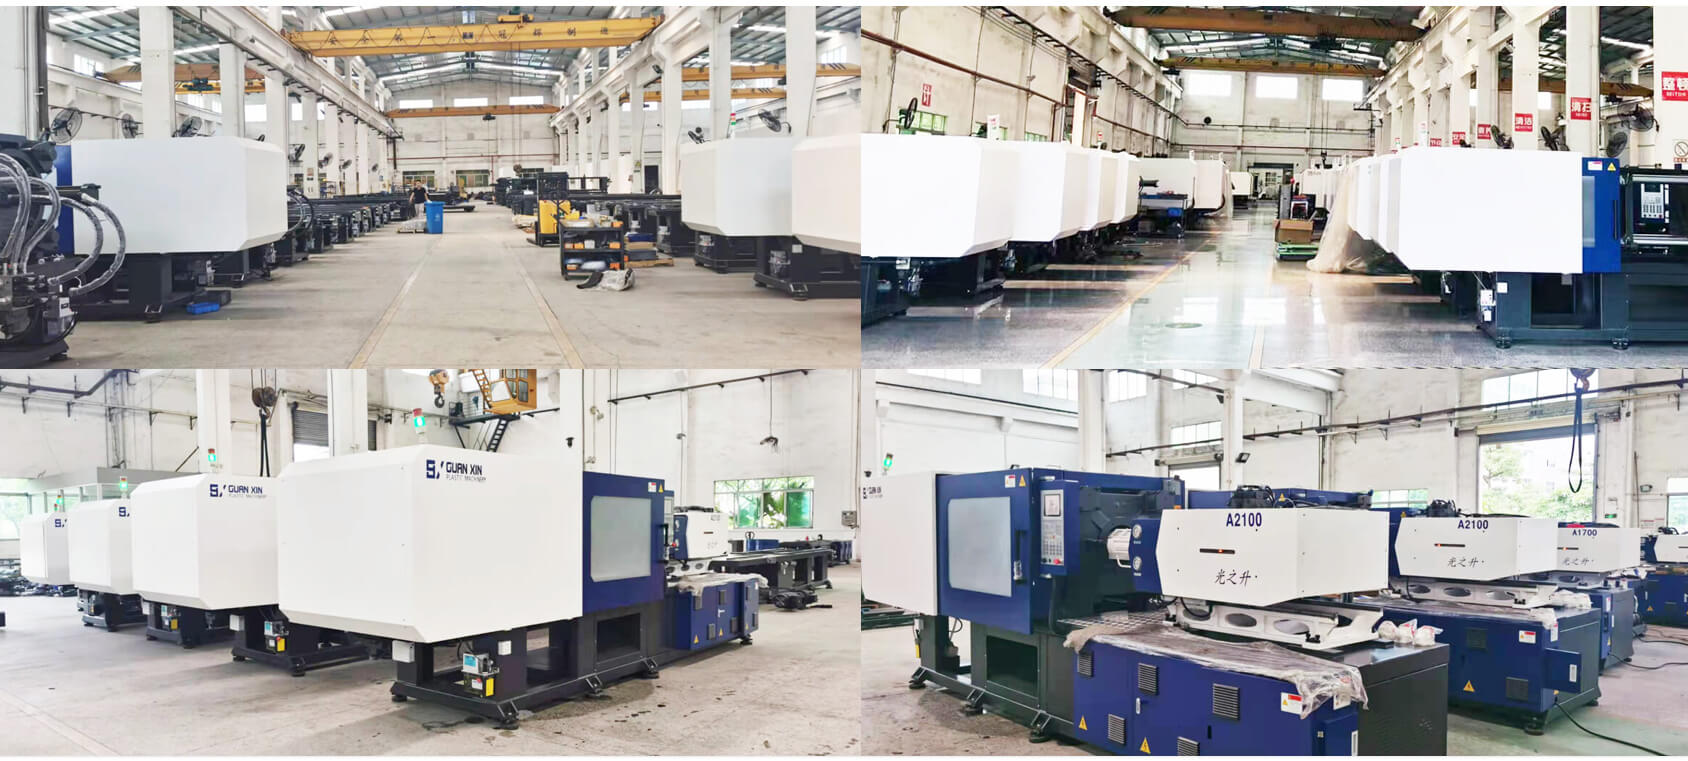 Professional HDPE Bottles injection blowing molding machines manufacturer & supplier in China